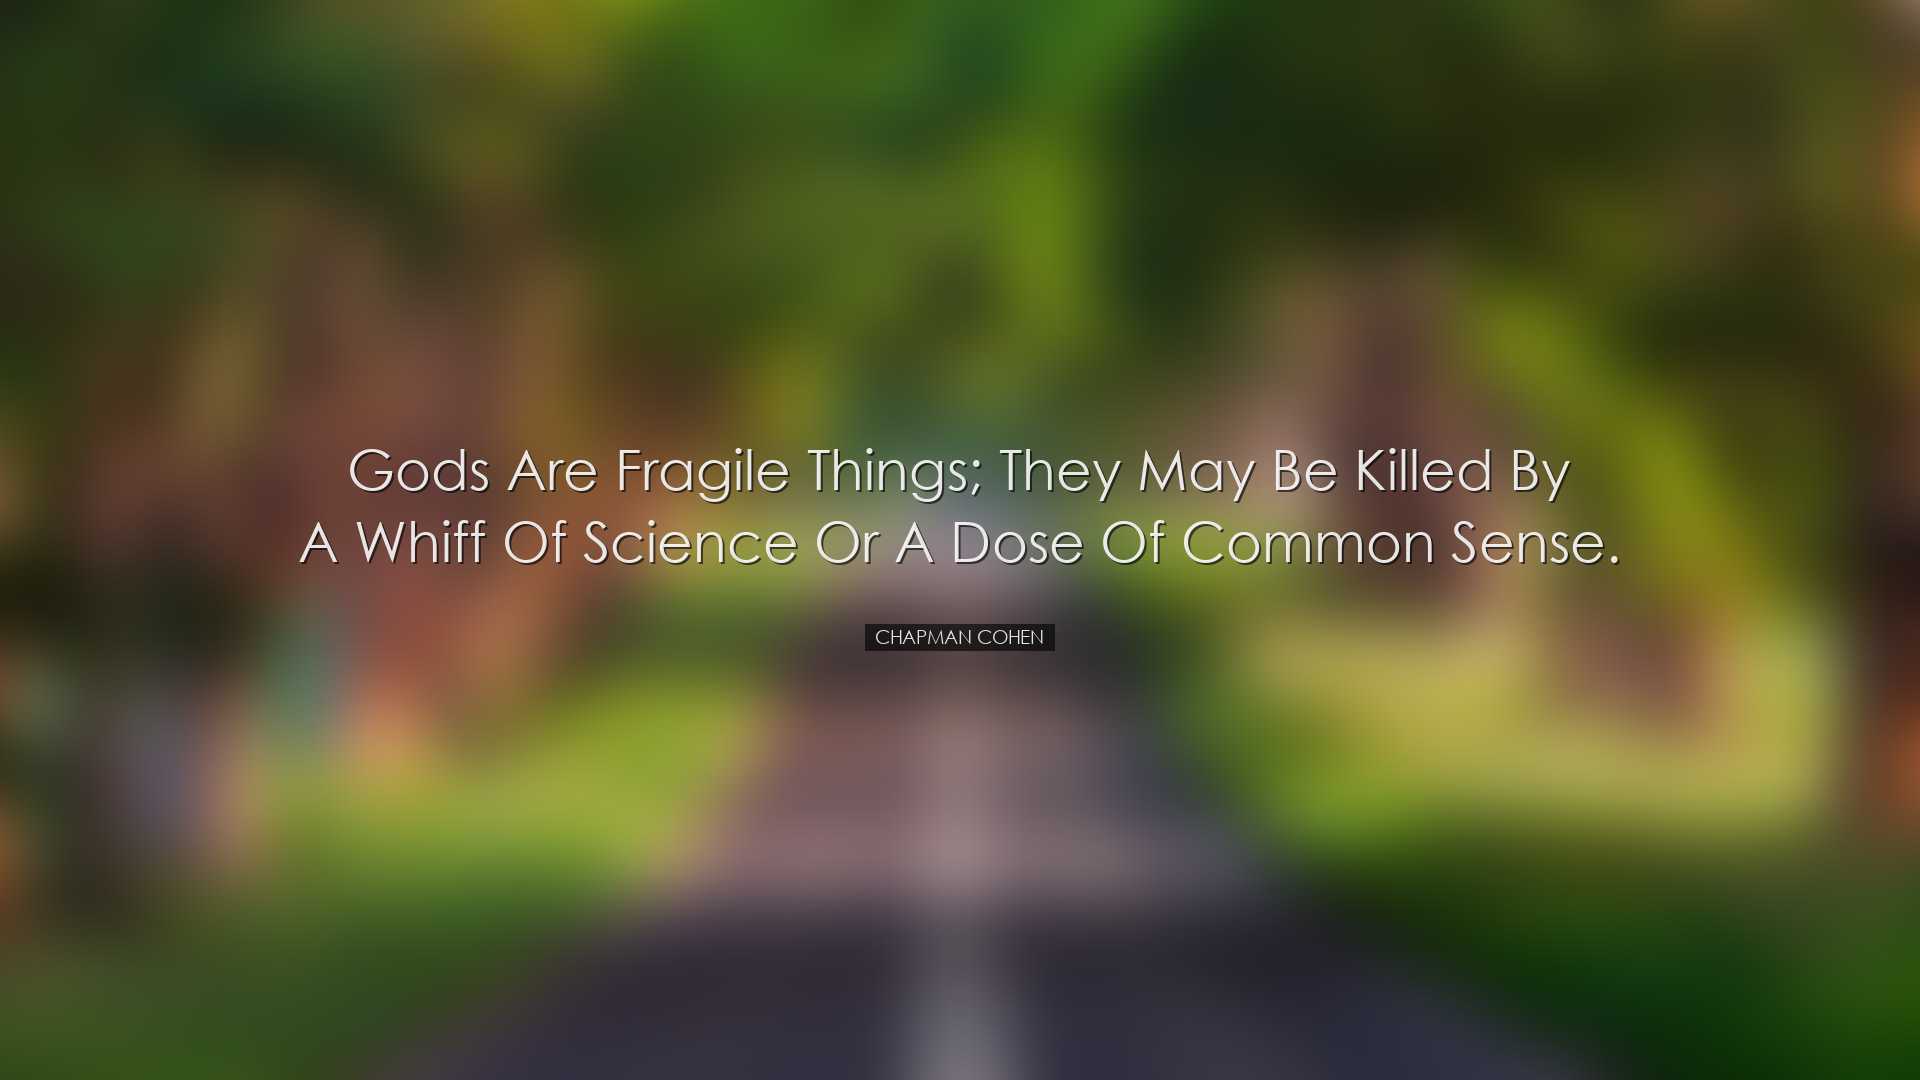 Gods are fragile things; they may be killed by a whiff of science